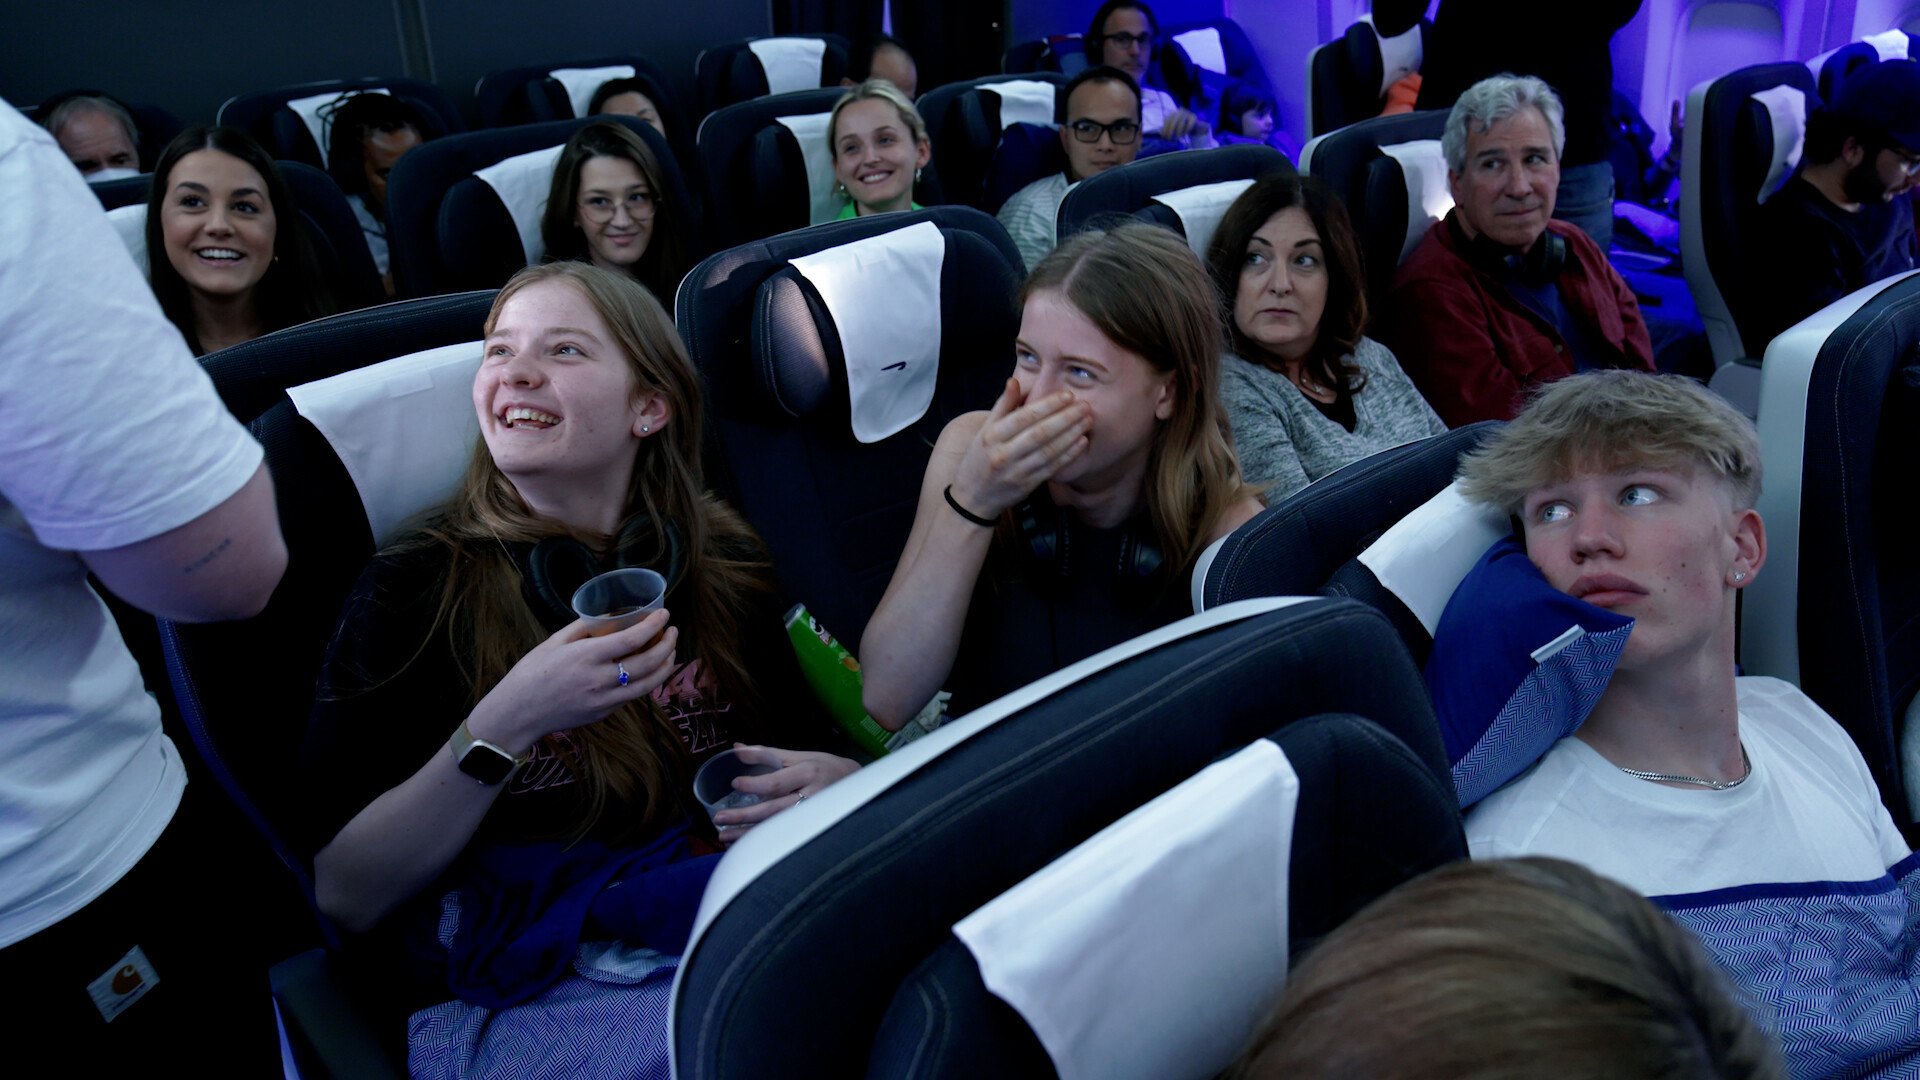 Four unsuspecting 'superfans' were specially invited onto the flight for the event. 